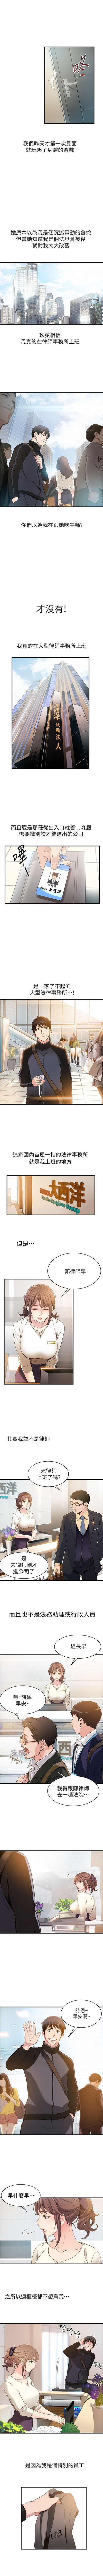 Bubble 弱點 1-90 官方中文（連載中） Flagra - Page 4